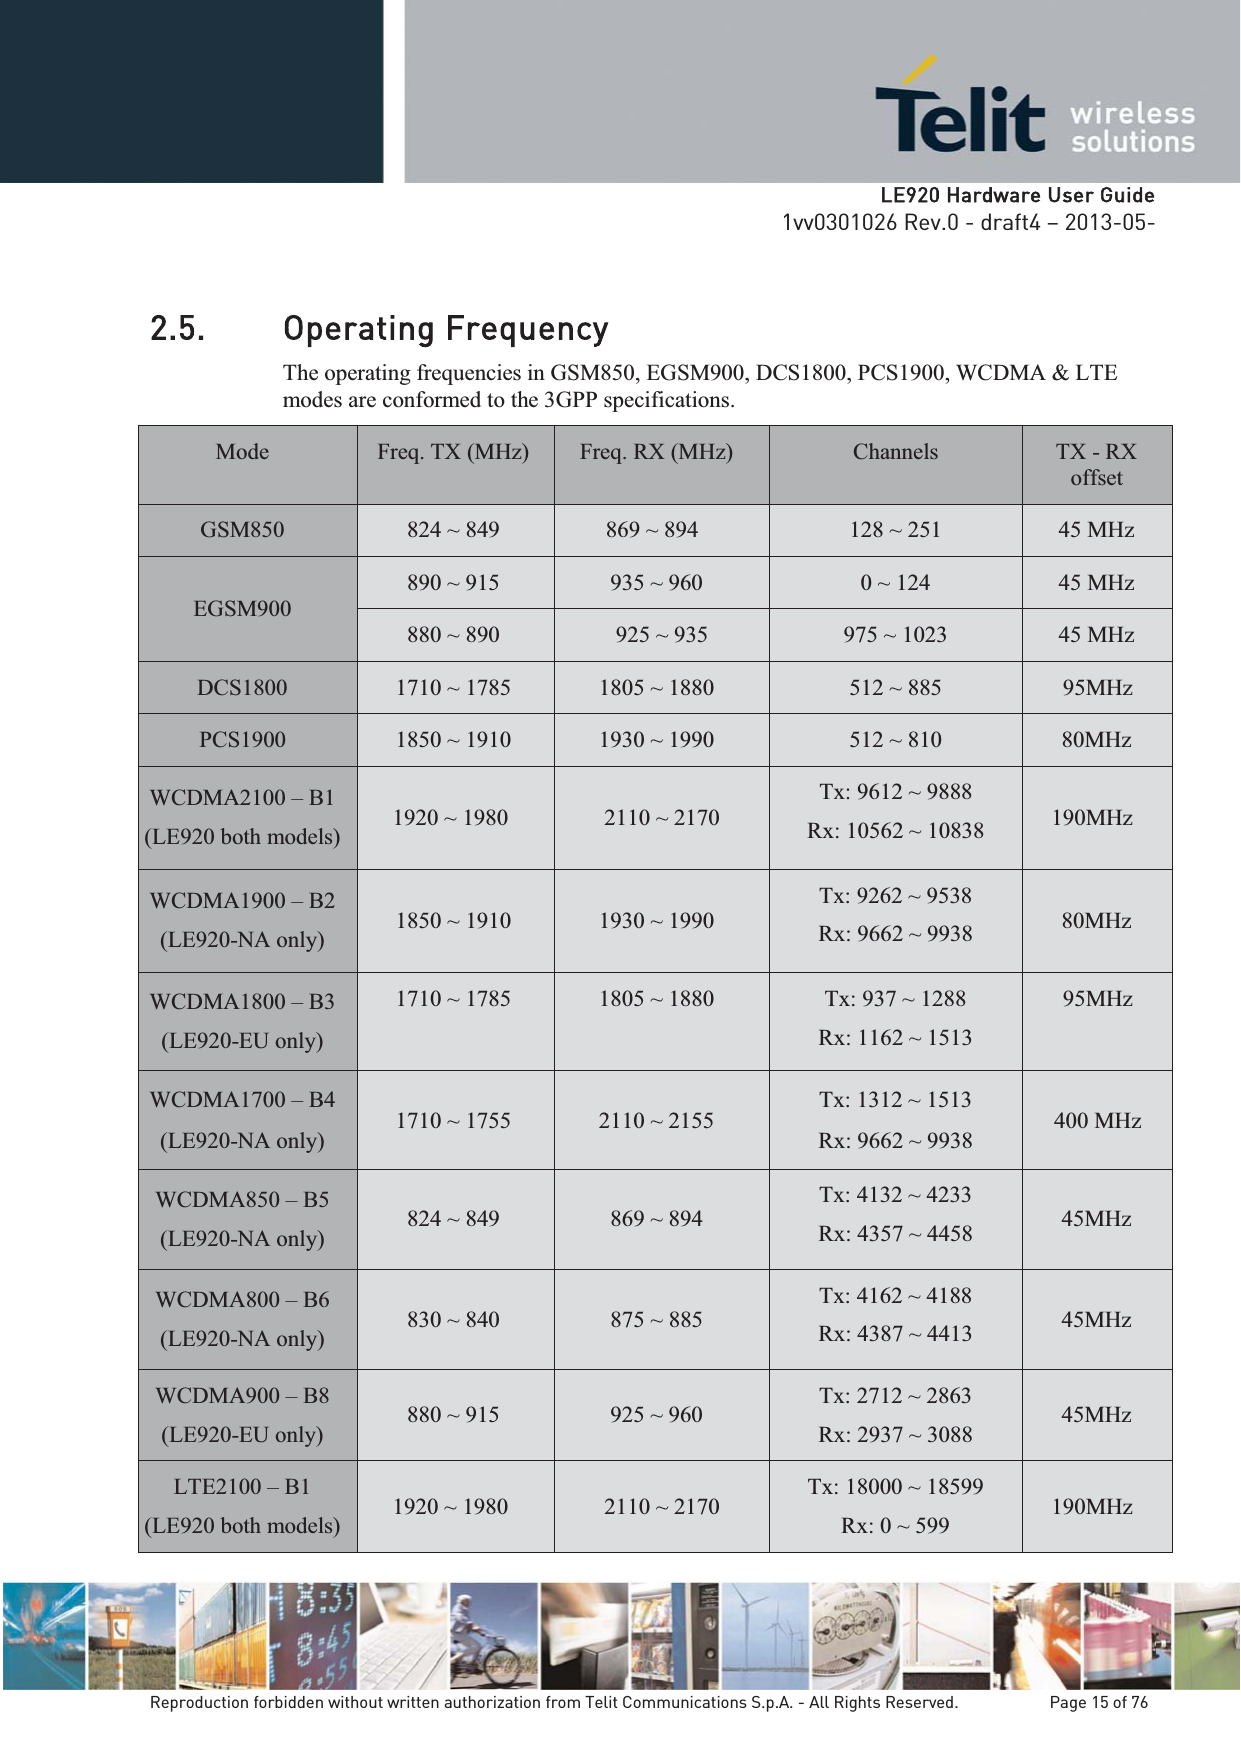   LLE920 Hardware User Guide1vv0301026 Rev.0 - draft4 – 2013-05-Reproduction forbidden without written authorization from Telit Communications S.p.A. - All Rights Reserved.    Page 15 of 76 2.5. Operating Frequency The operating frequencies in GSM850, EGSM900, DCS1800, PCS1900, WCDMA &amp; LTE modes are conformed to the 3GPP specifications. Mode  Freq. TX (MHz)  Freq. RX (MHz)  Channels  TX - RX offset GSM850 824 ~ 849 869 ~ 894 128 ~ 251 45 MHzEGSM900 890 ~ 915  935 ~ 960  0 ~ 124  45 MHz 880 ~ 890  925 ~ 935  975 ~ 1023  45 MHz DCS1800  1710 ~ 1785  1805 ~ 1880  512 ~ 885  95MHz         PCS1900  1850 ~ 1910  1930 ~ 1990  512 ~ 810  80MHz WCDMA2100 – B1 (LE920 both models)  1920 ~ 1980 2110 ~ 2170Tx: 9612 ~ 9888 Rx: 10562 ~ 10838  190MHzWCDMA1900 – B2 (LE920-NA only)  1850 ~ 1910  1930 ~ 1990 Tx: 9262 ~ 9538 Rx: 9662 ~ 9938  80MHz WCDMA1800 – B3 (LE920-EU only) 1710 ~ 1785  1805 ~ 1880  Tx: 937 ~ 1288 Rx: 1162 ~ 1513 95MHz WCDMA1700 – B4 (LE920-NA only)   1710 ~ 1755  2110 ~ 2155  Tx: 1312 ~ 1513 Rx: 9662 ~ 9938  400 MHz WCDMA850 – B5 (LE920-NA only)  824 ~ 849  869 ~ 894 Tx: 4132 ~ 4233 Rx: 4357 ~ 4458  45MHz WCDMA800 – B6 (LE920-NA only)  830 ~ 840  875 ~ 885 Tx: 4162 ~ 4188 Rx: 4387 ~ 4413  45MHz WCDMA900 – B8 (LE920-EU only)  880 ~ 915  925 ~ 960  Tx: 2712 ~ 2863 Rx: 2937 ~ 3088  45MHz LTE2100 – B1 (LE920 both models)  1920 ~ 1980  2110 ~ 2170  Tx: 18000 ~ 18599 Rx: 0 ~ 599   190MHz 